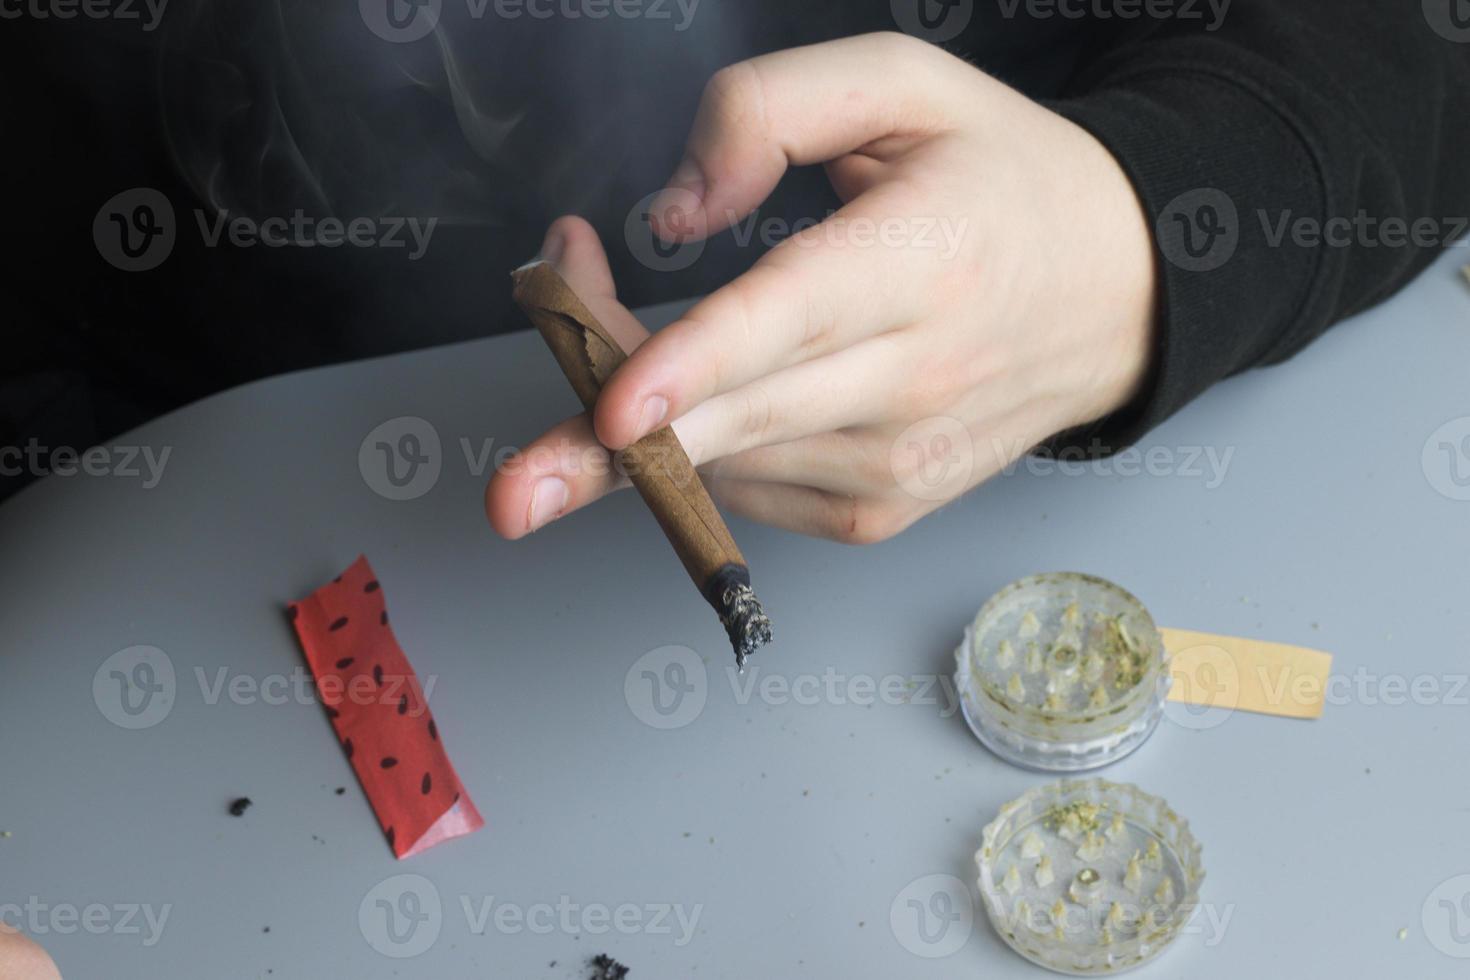 Blunt smoking. Cannabis medical and recreational use. Legal weed photo